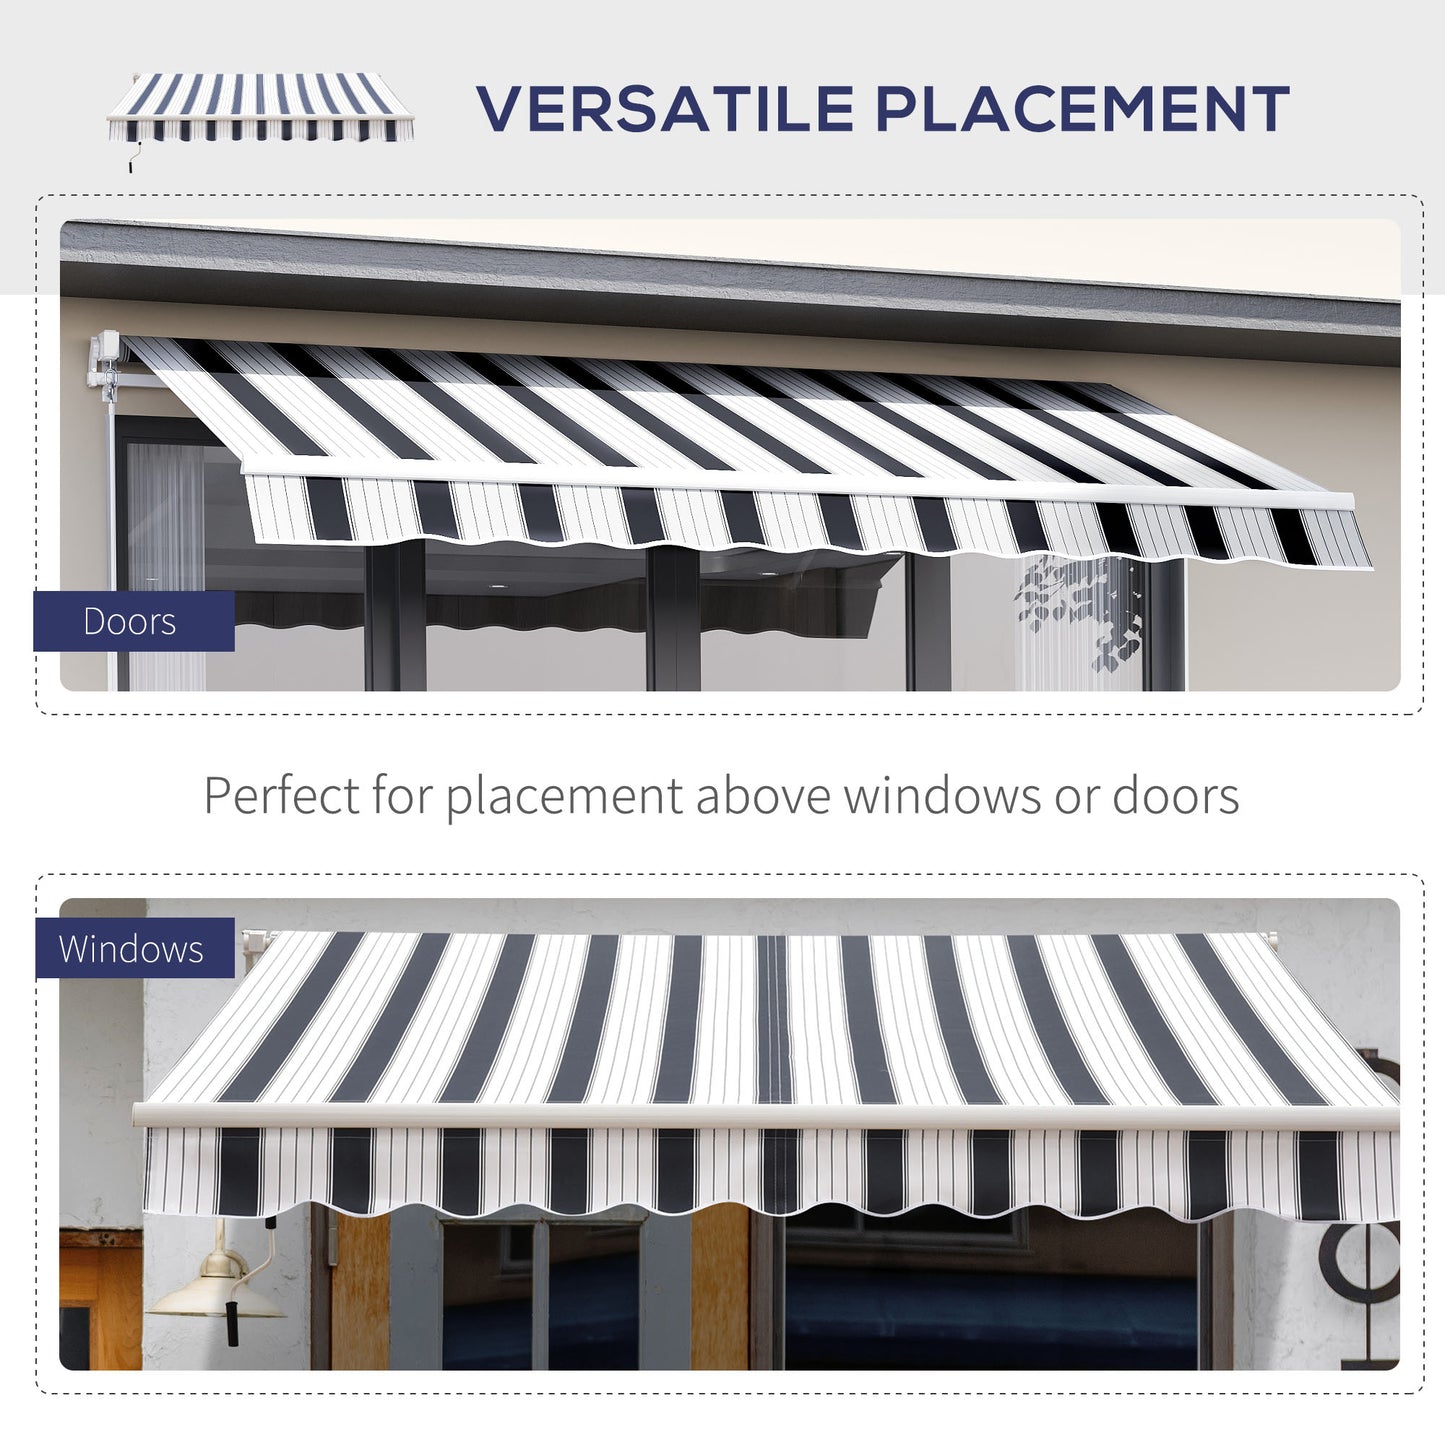 Outsunny Retractable Garden Awning 2.5x2 m Blue White Strips Patio Manual Canopy Sun Shade Shelter with Winding Handle